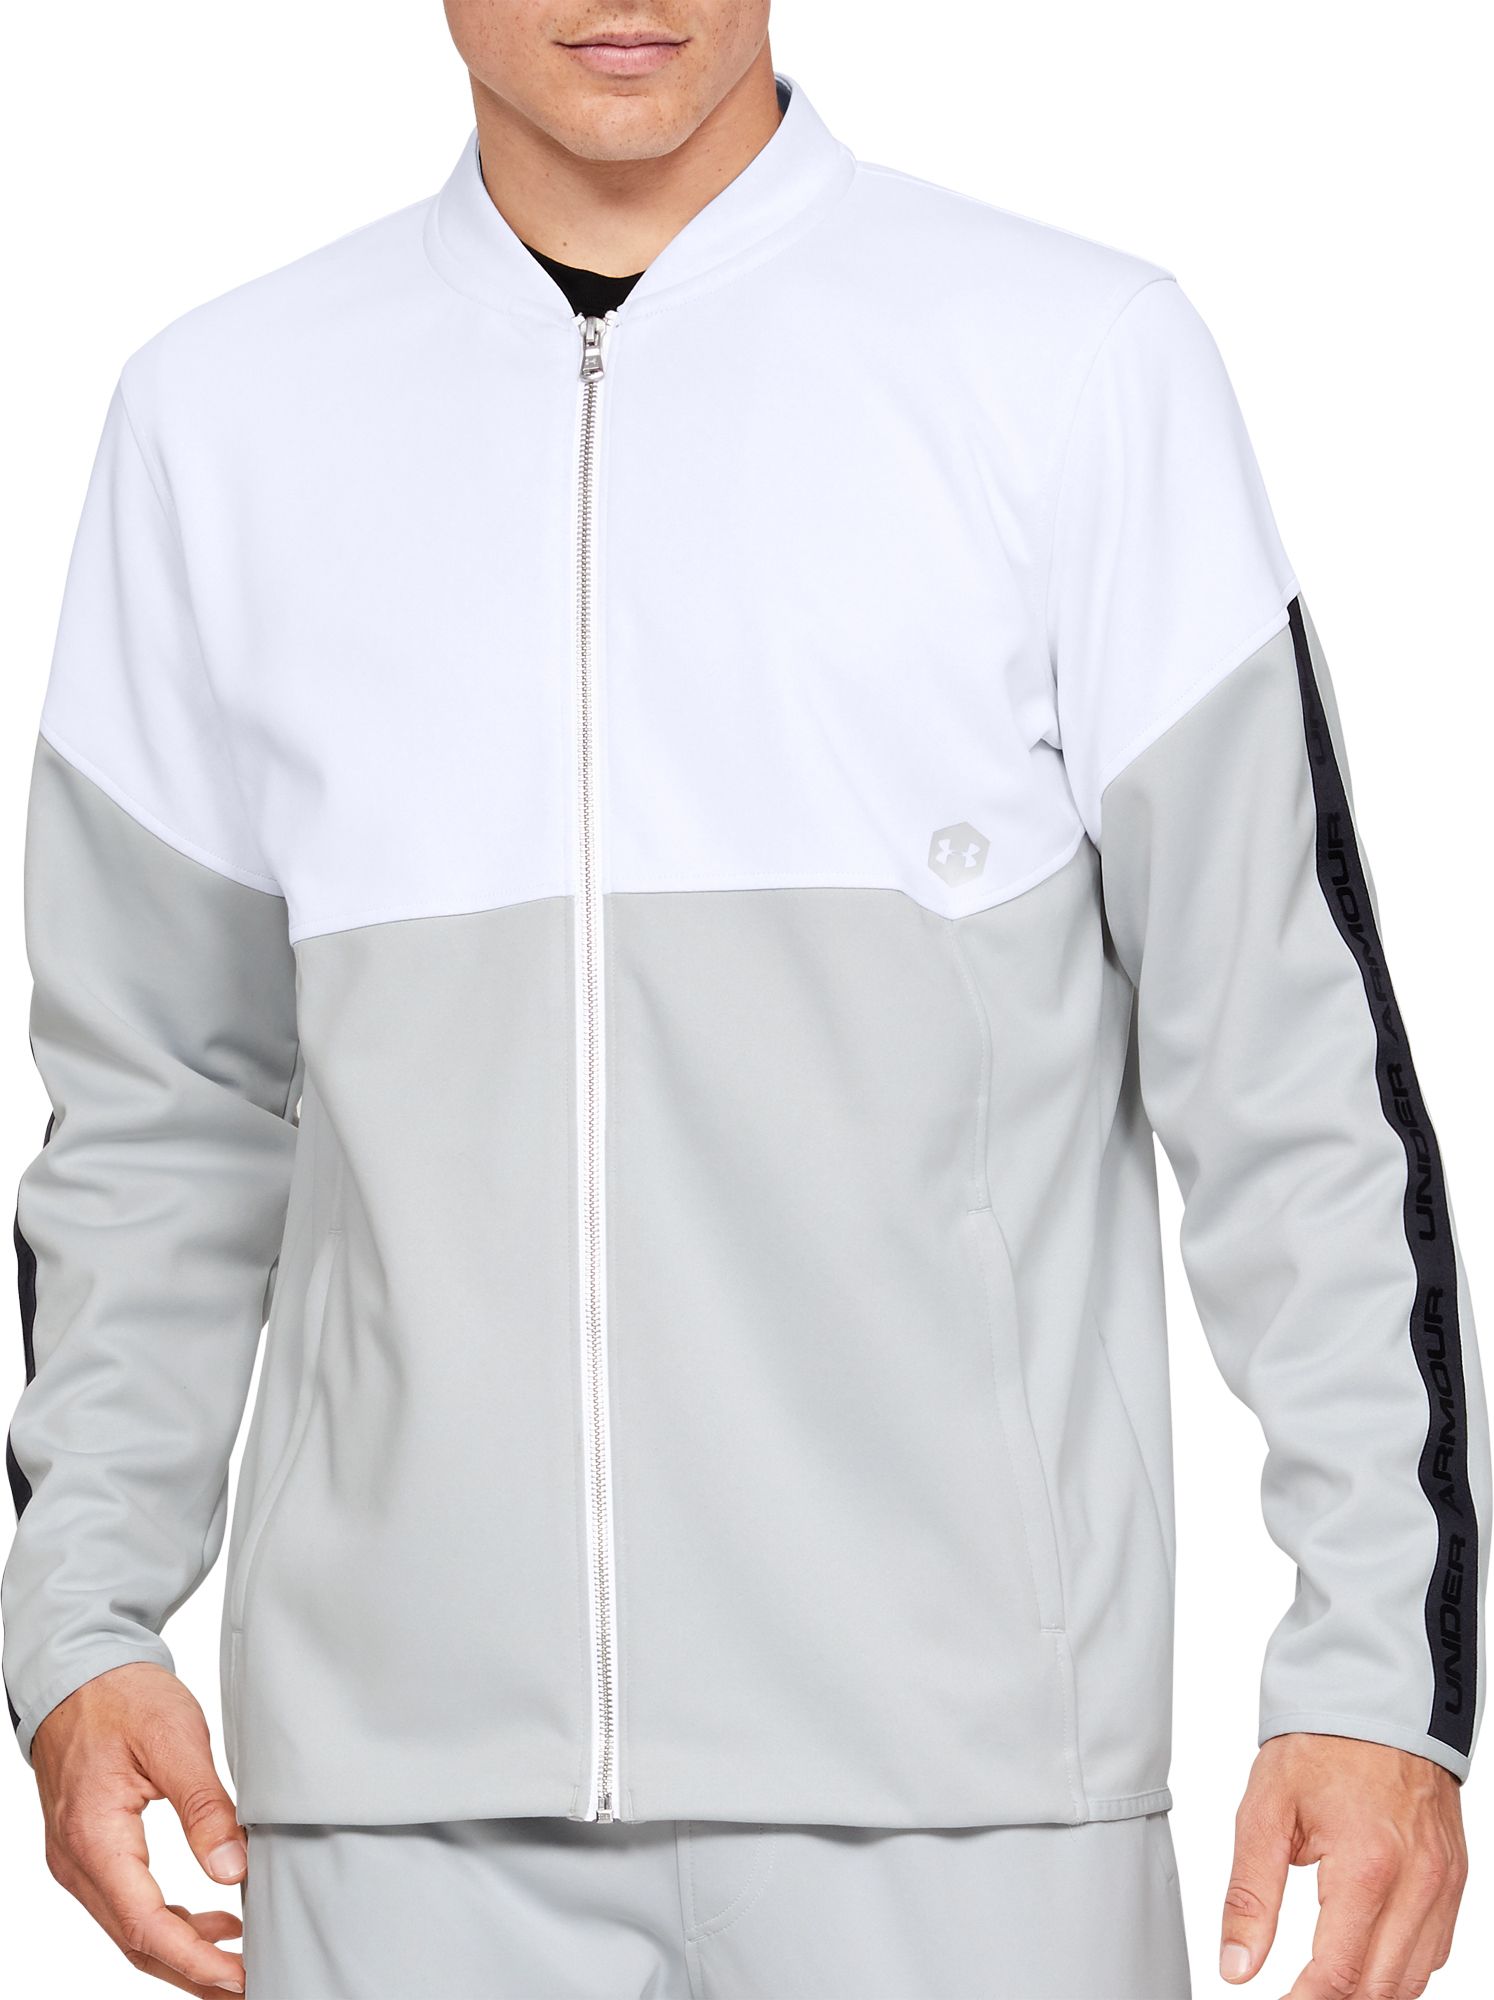 Under Armour Men's Athlete Recovery Knit Warm-Up Jacket - image 1 of 2